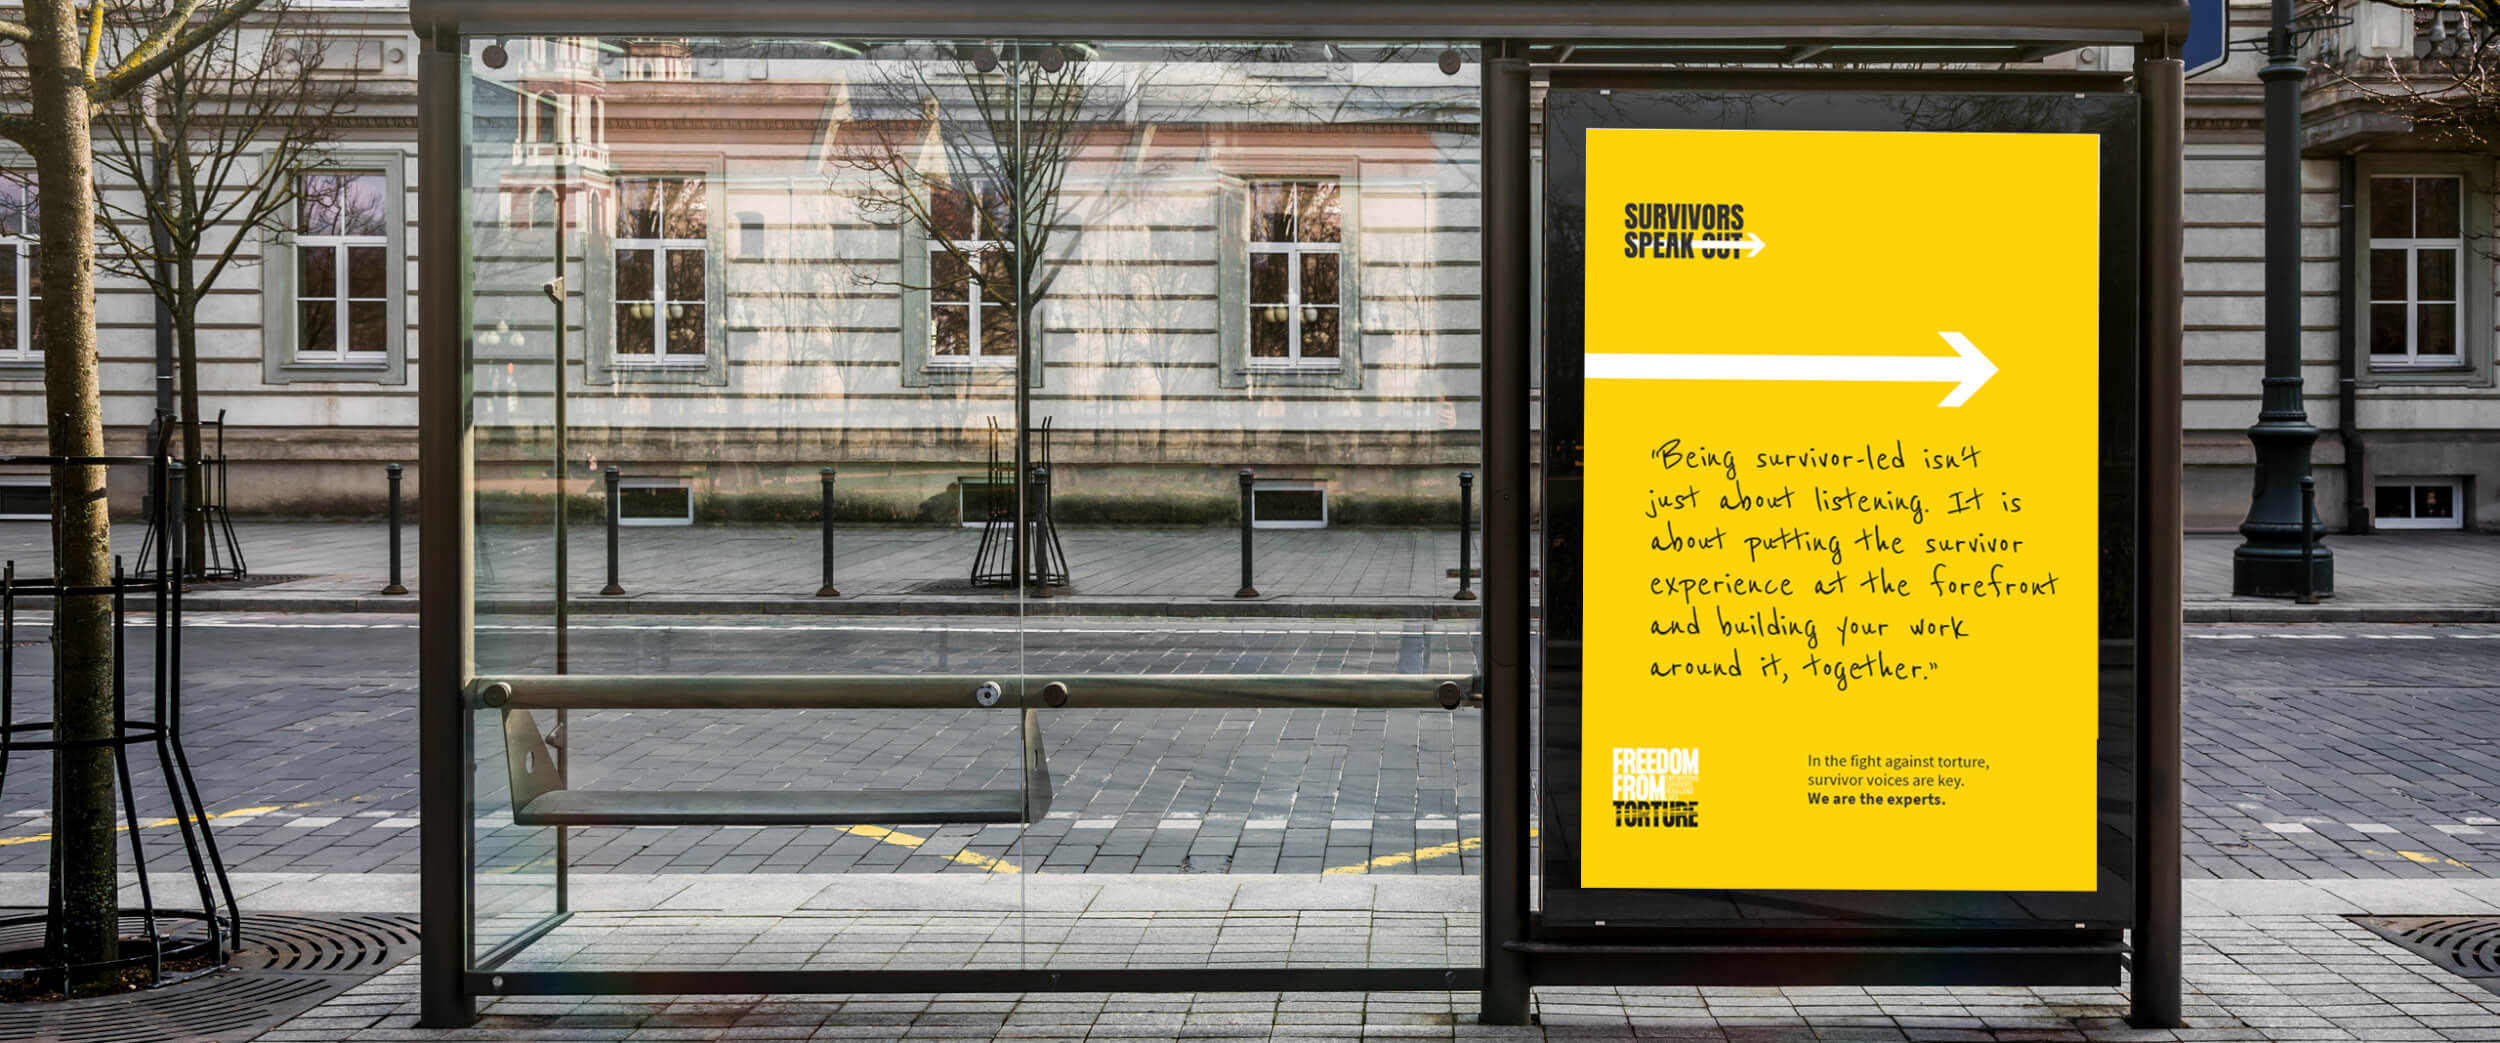 Survivors Speak OUT charity brand awareness bus stop poster